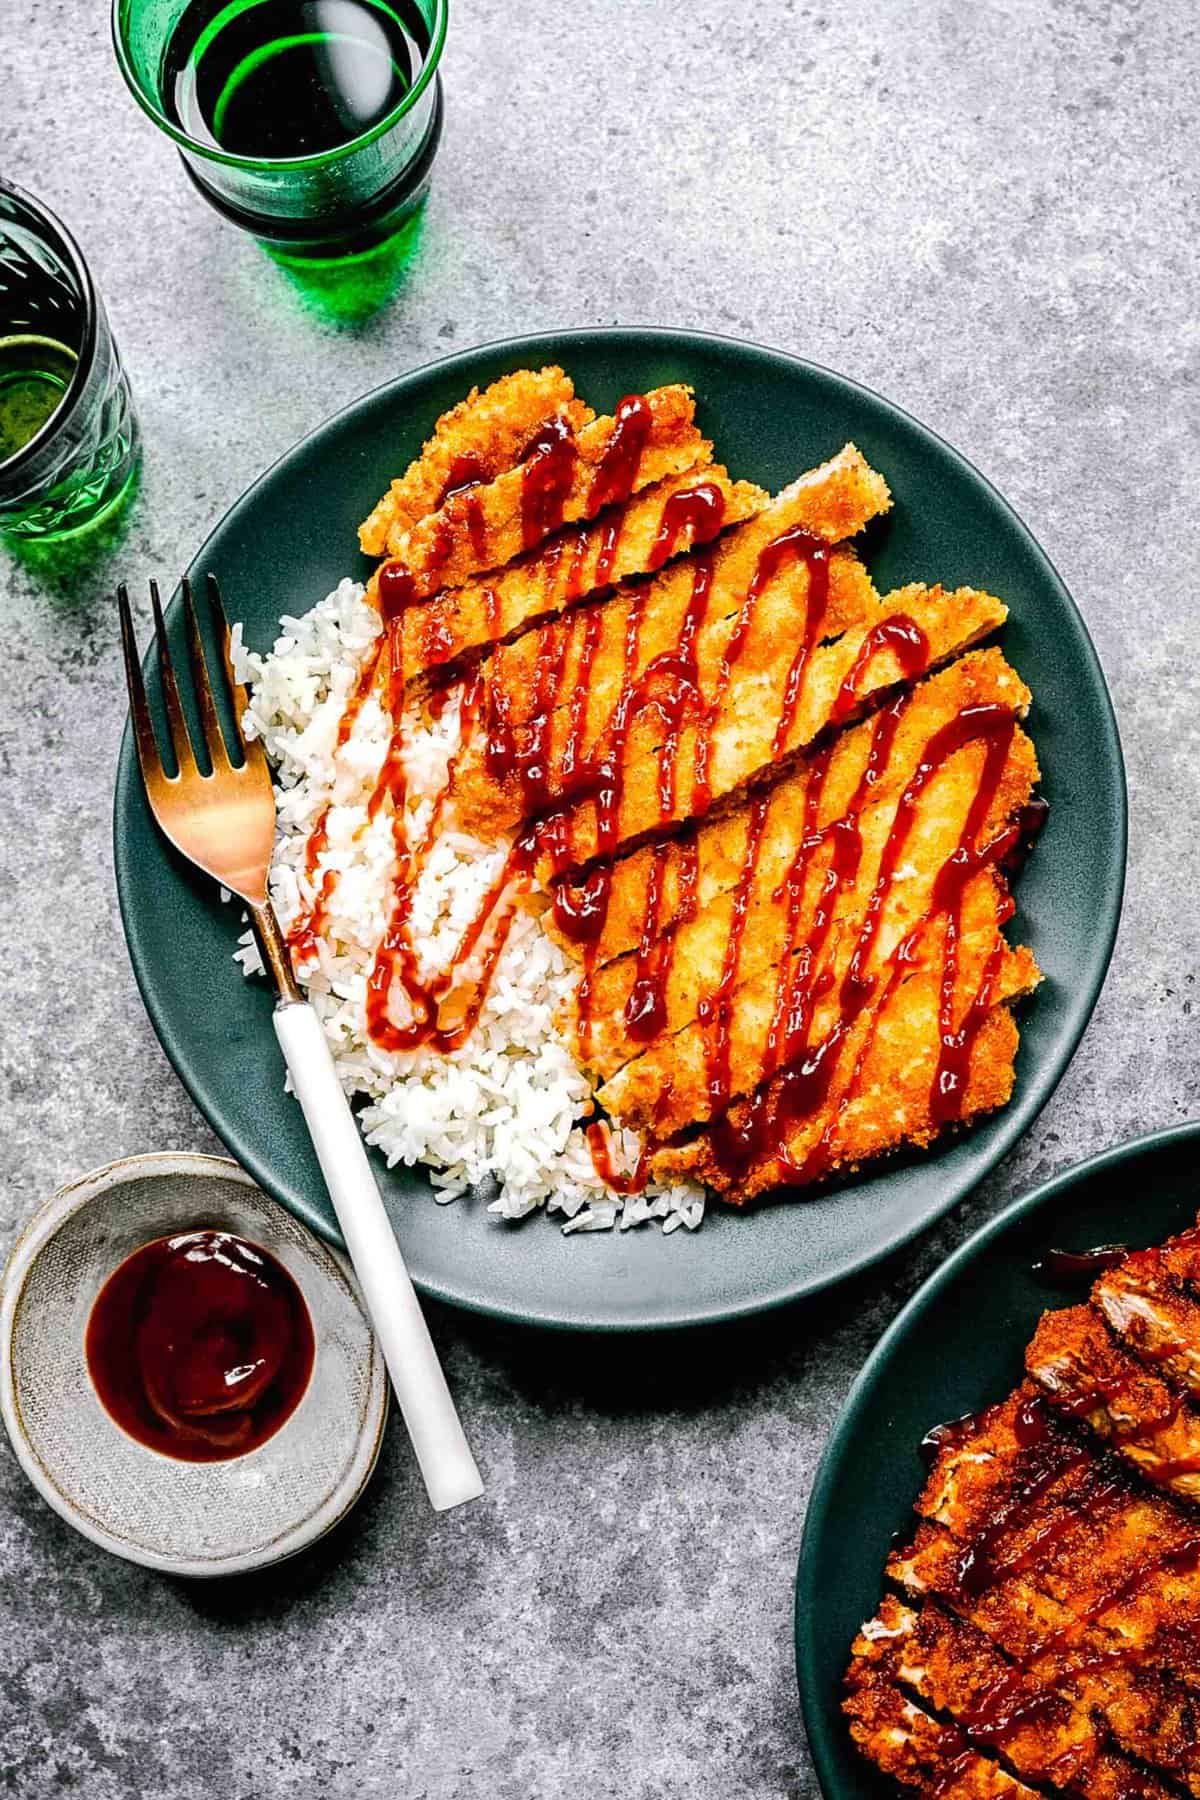 Pork katsu on a plate with a fork over white rice and sauce next to sauce and drinking glasses.